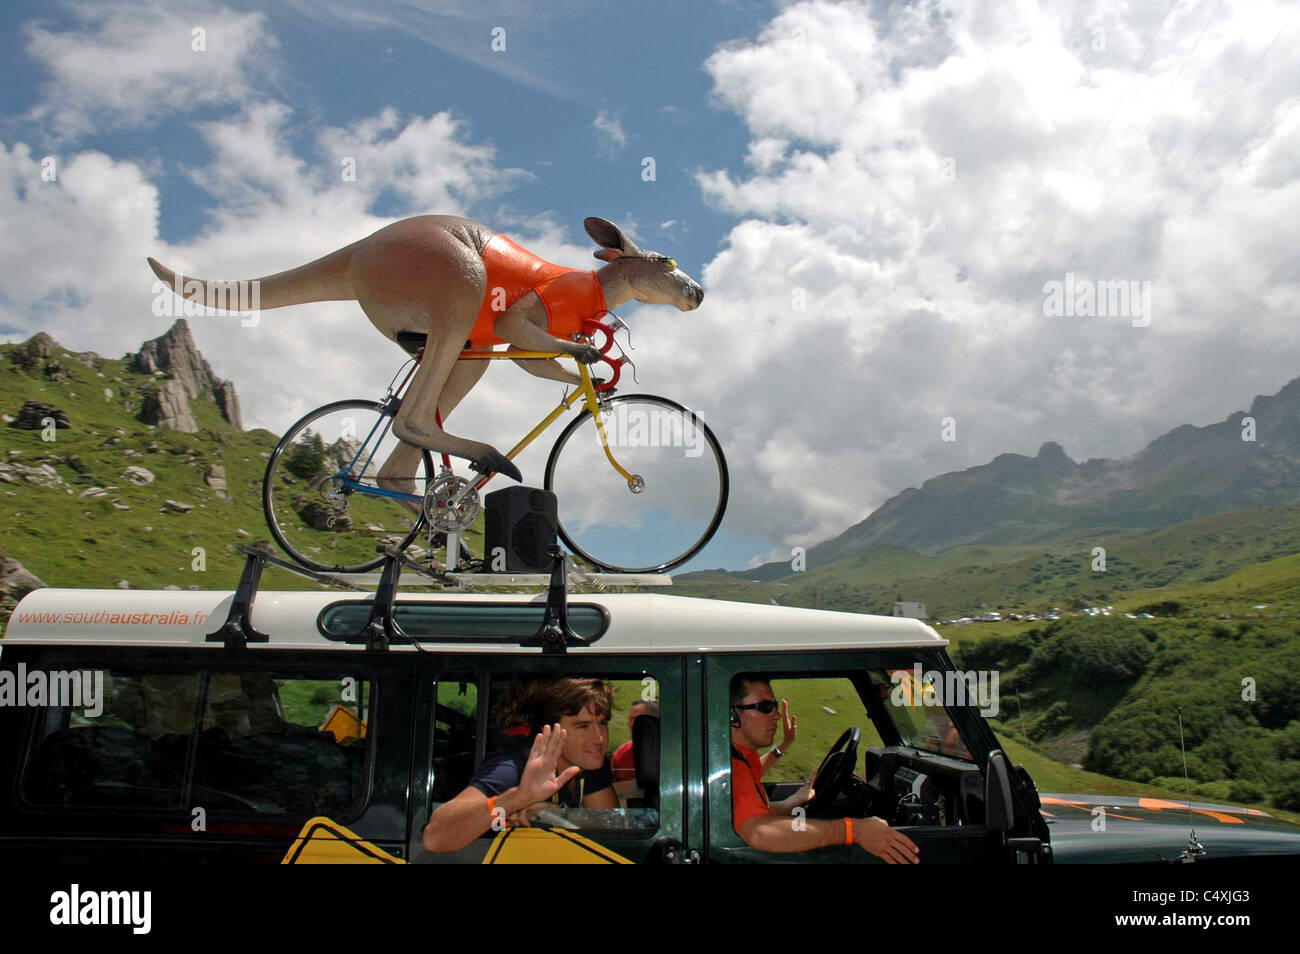 The Tour de France sponsors caravan drives through the mountain stage on the Grenoble to Courcheval stage of the race. Stock Photo